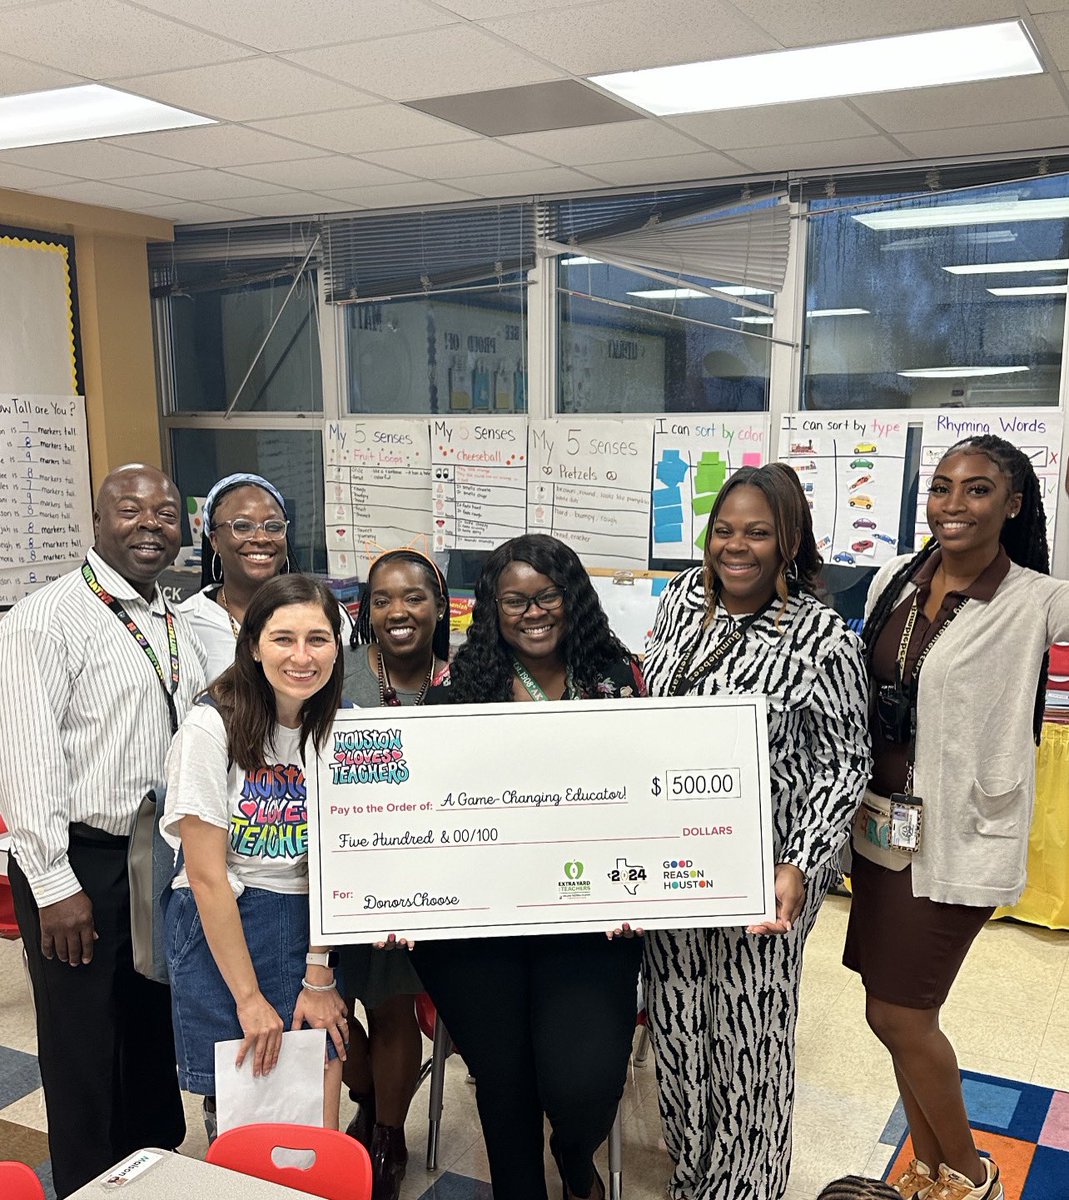 Congratulations to Ms. Clay for winning a $500 gift card from Good Reason Houston! 💰🎉 You are so deserving! 🐝❤️ @GoodReasonHou @TeamHISD @ShanicaMitchell